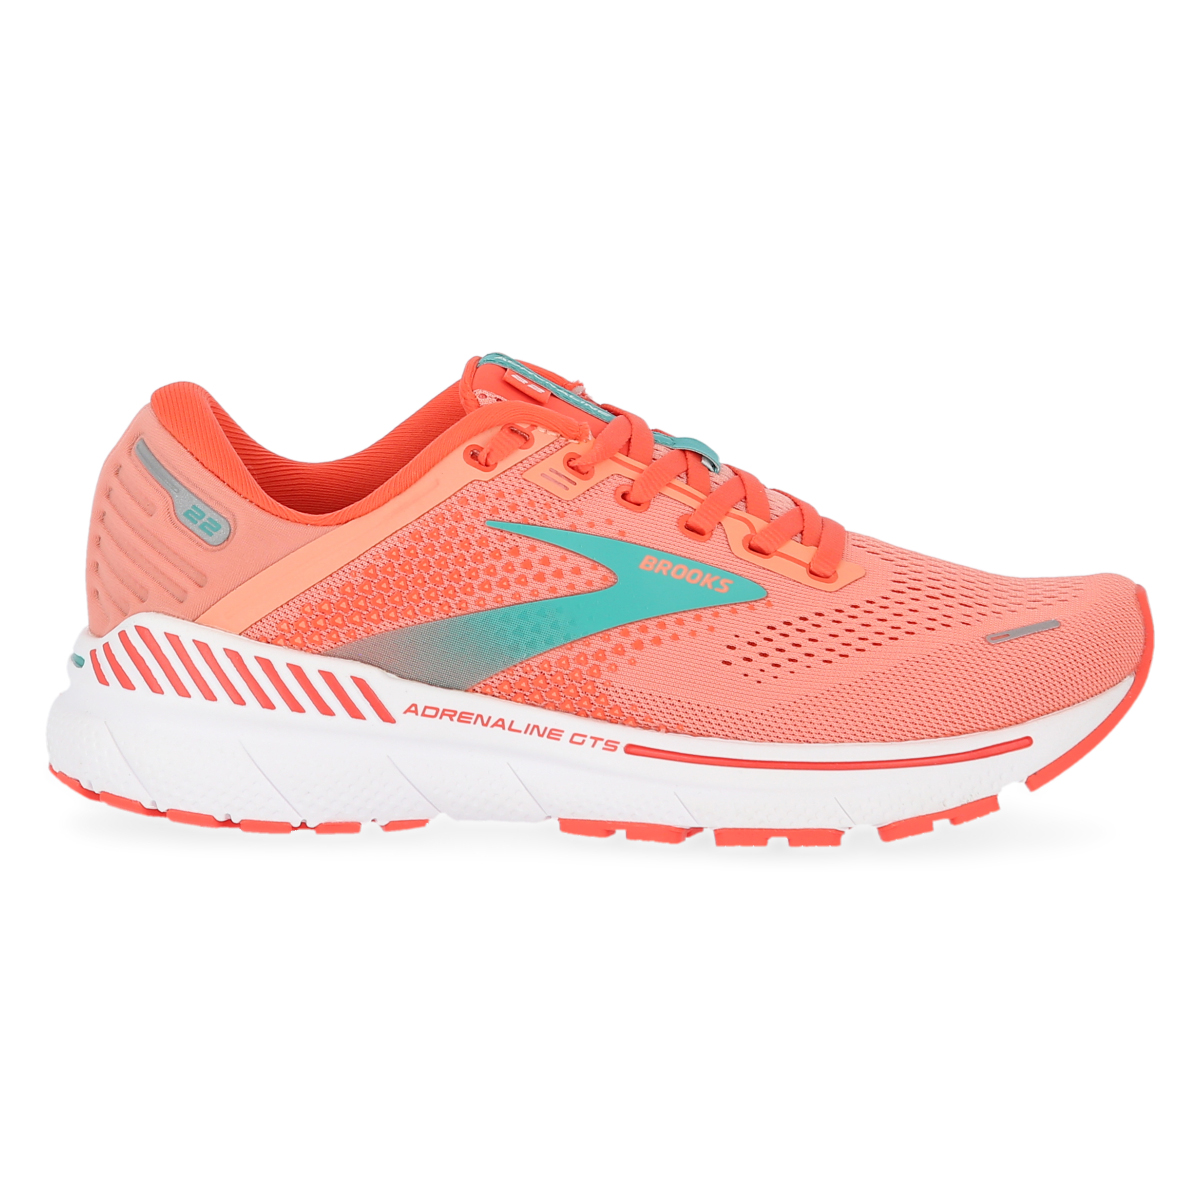 Zapatillas Running Brooks Adrenaline Gts 22 W 680 Mujer,  image number null